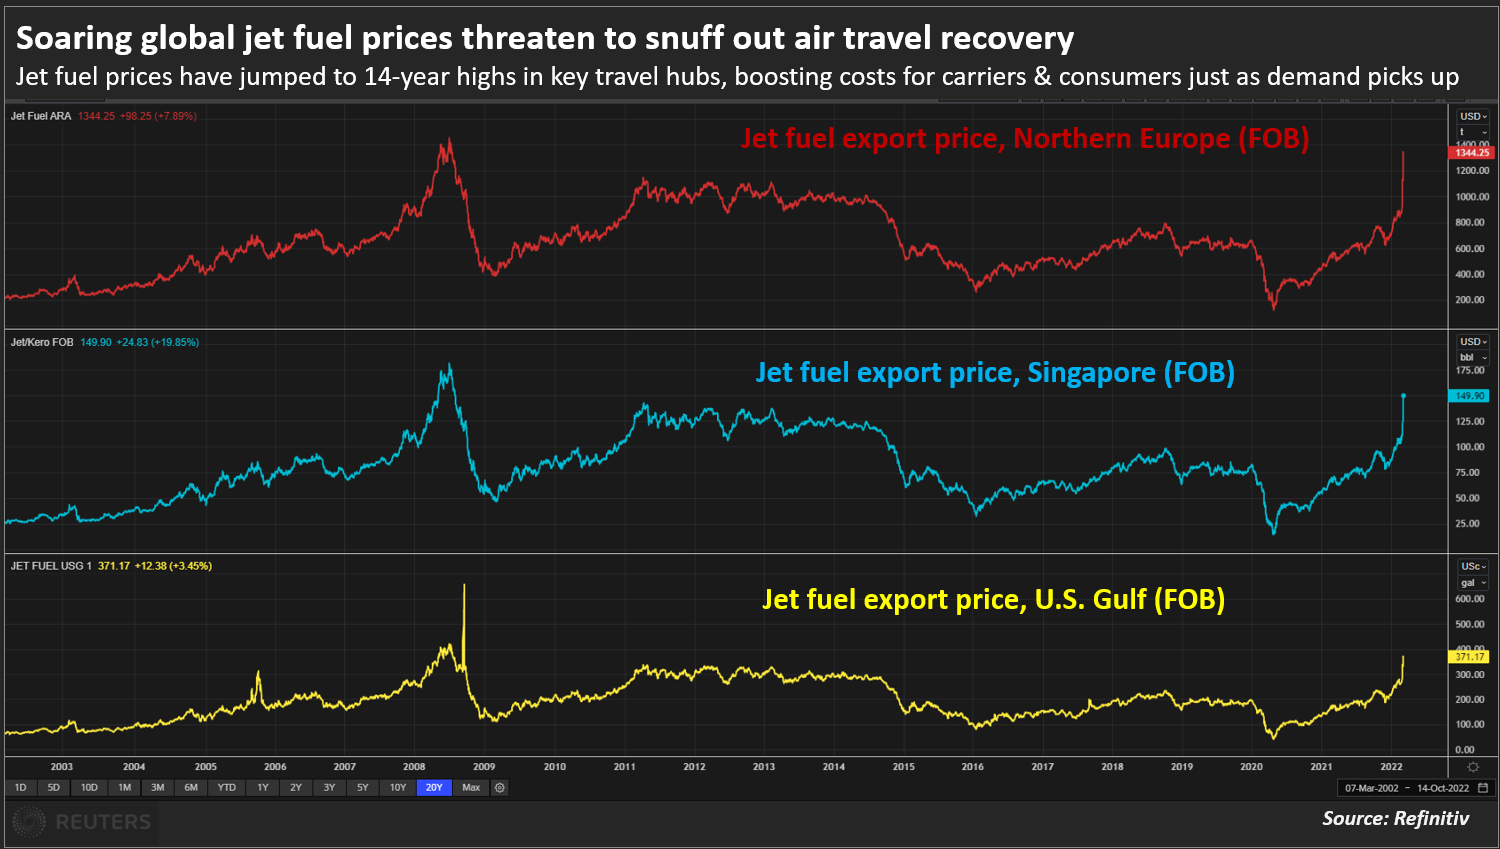 Soaring global jet fuel prices threaten to snuff out air travel recovery